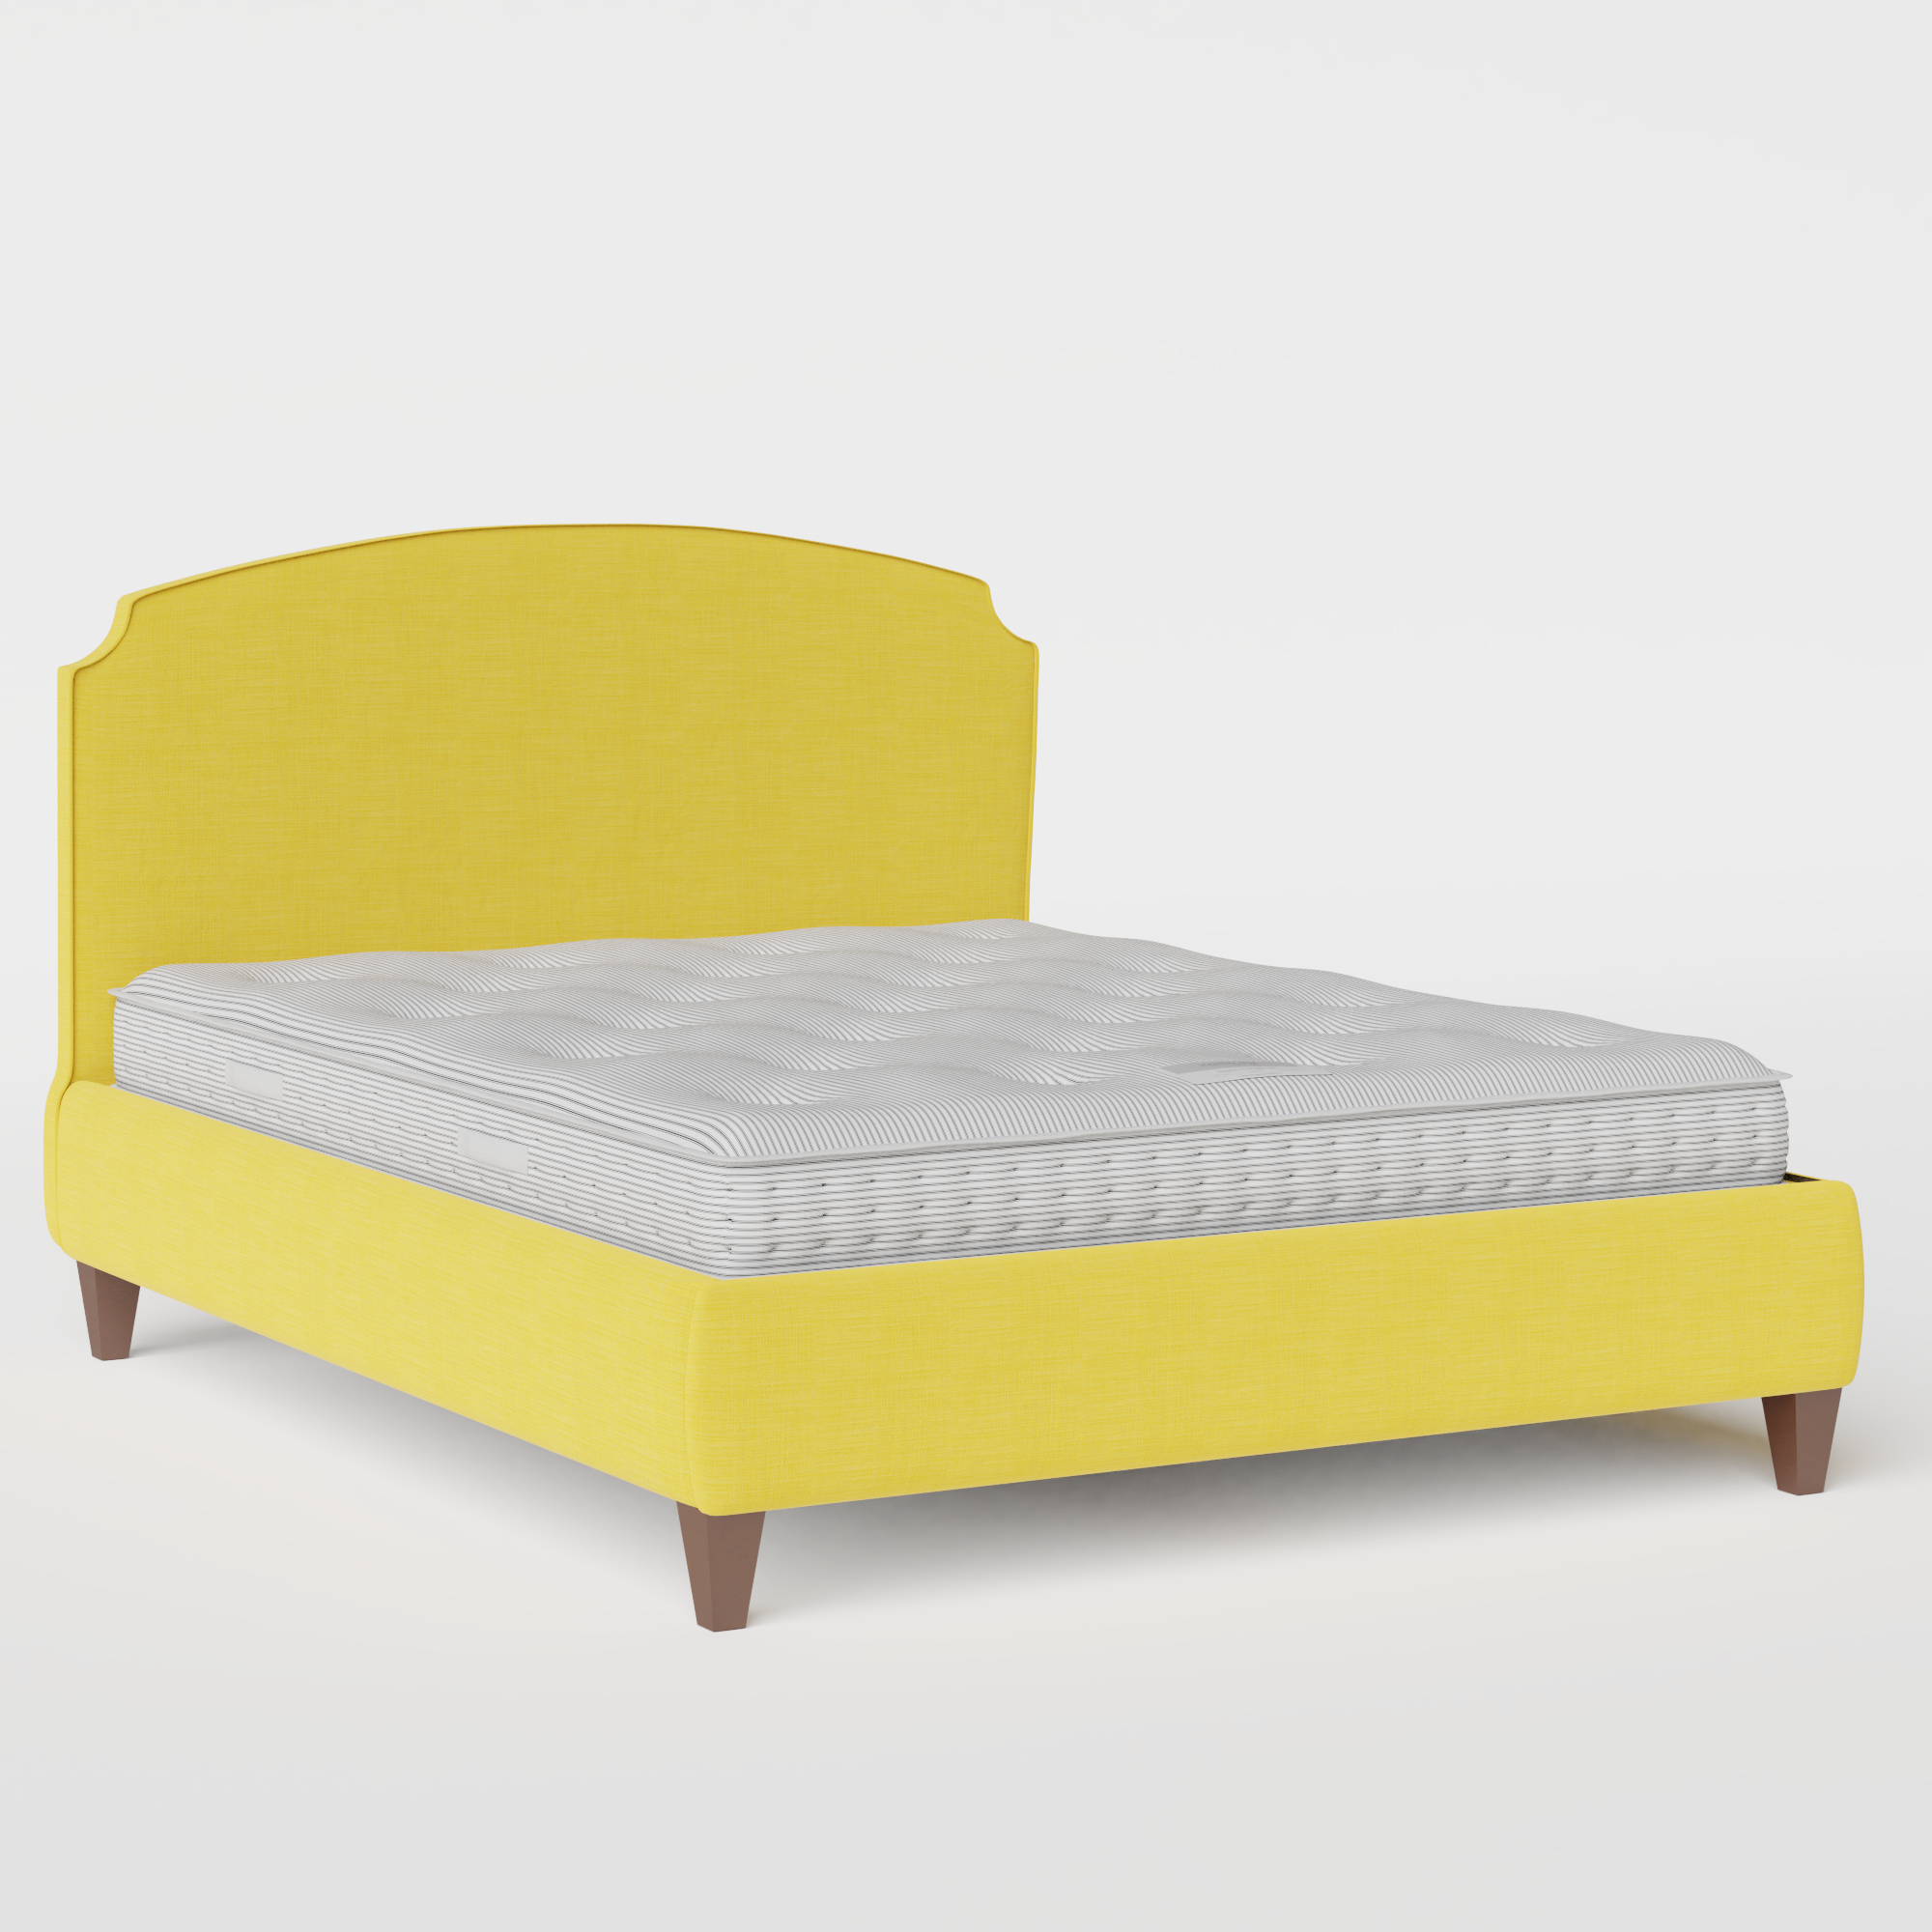 Lide with Piping upholstered bed in sunflower fabric